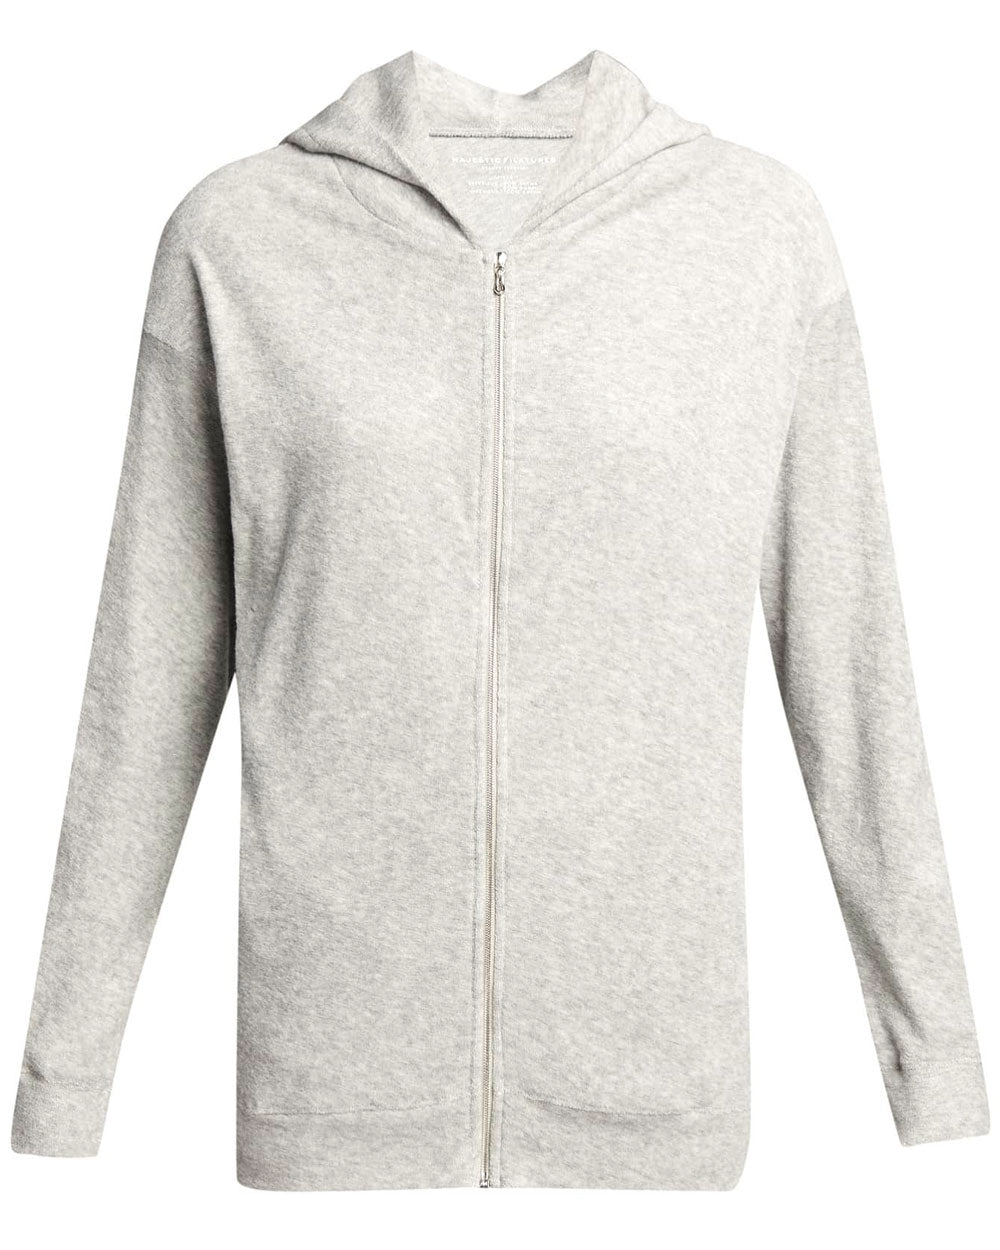 Grey French Terry Cloth Zip Jacket